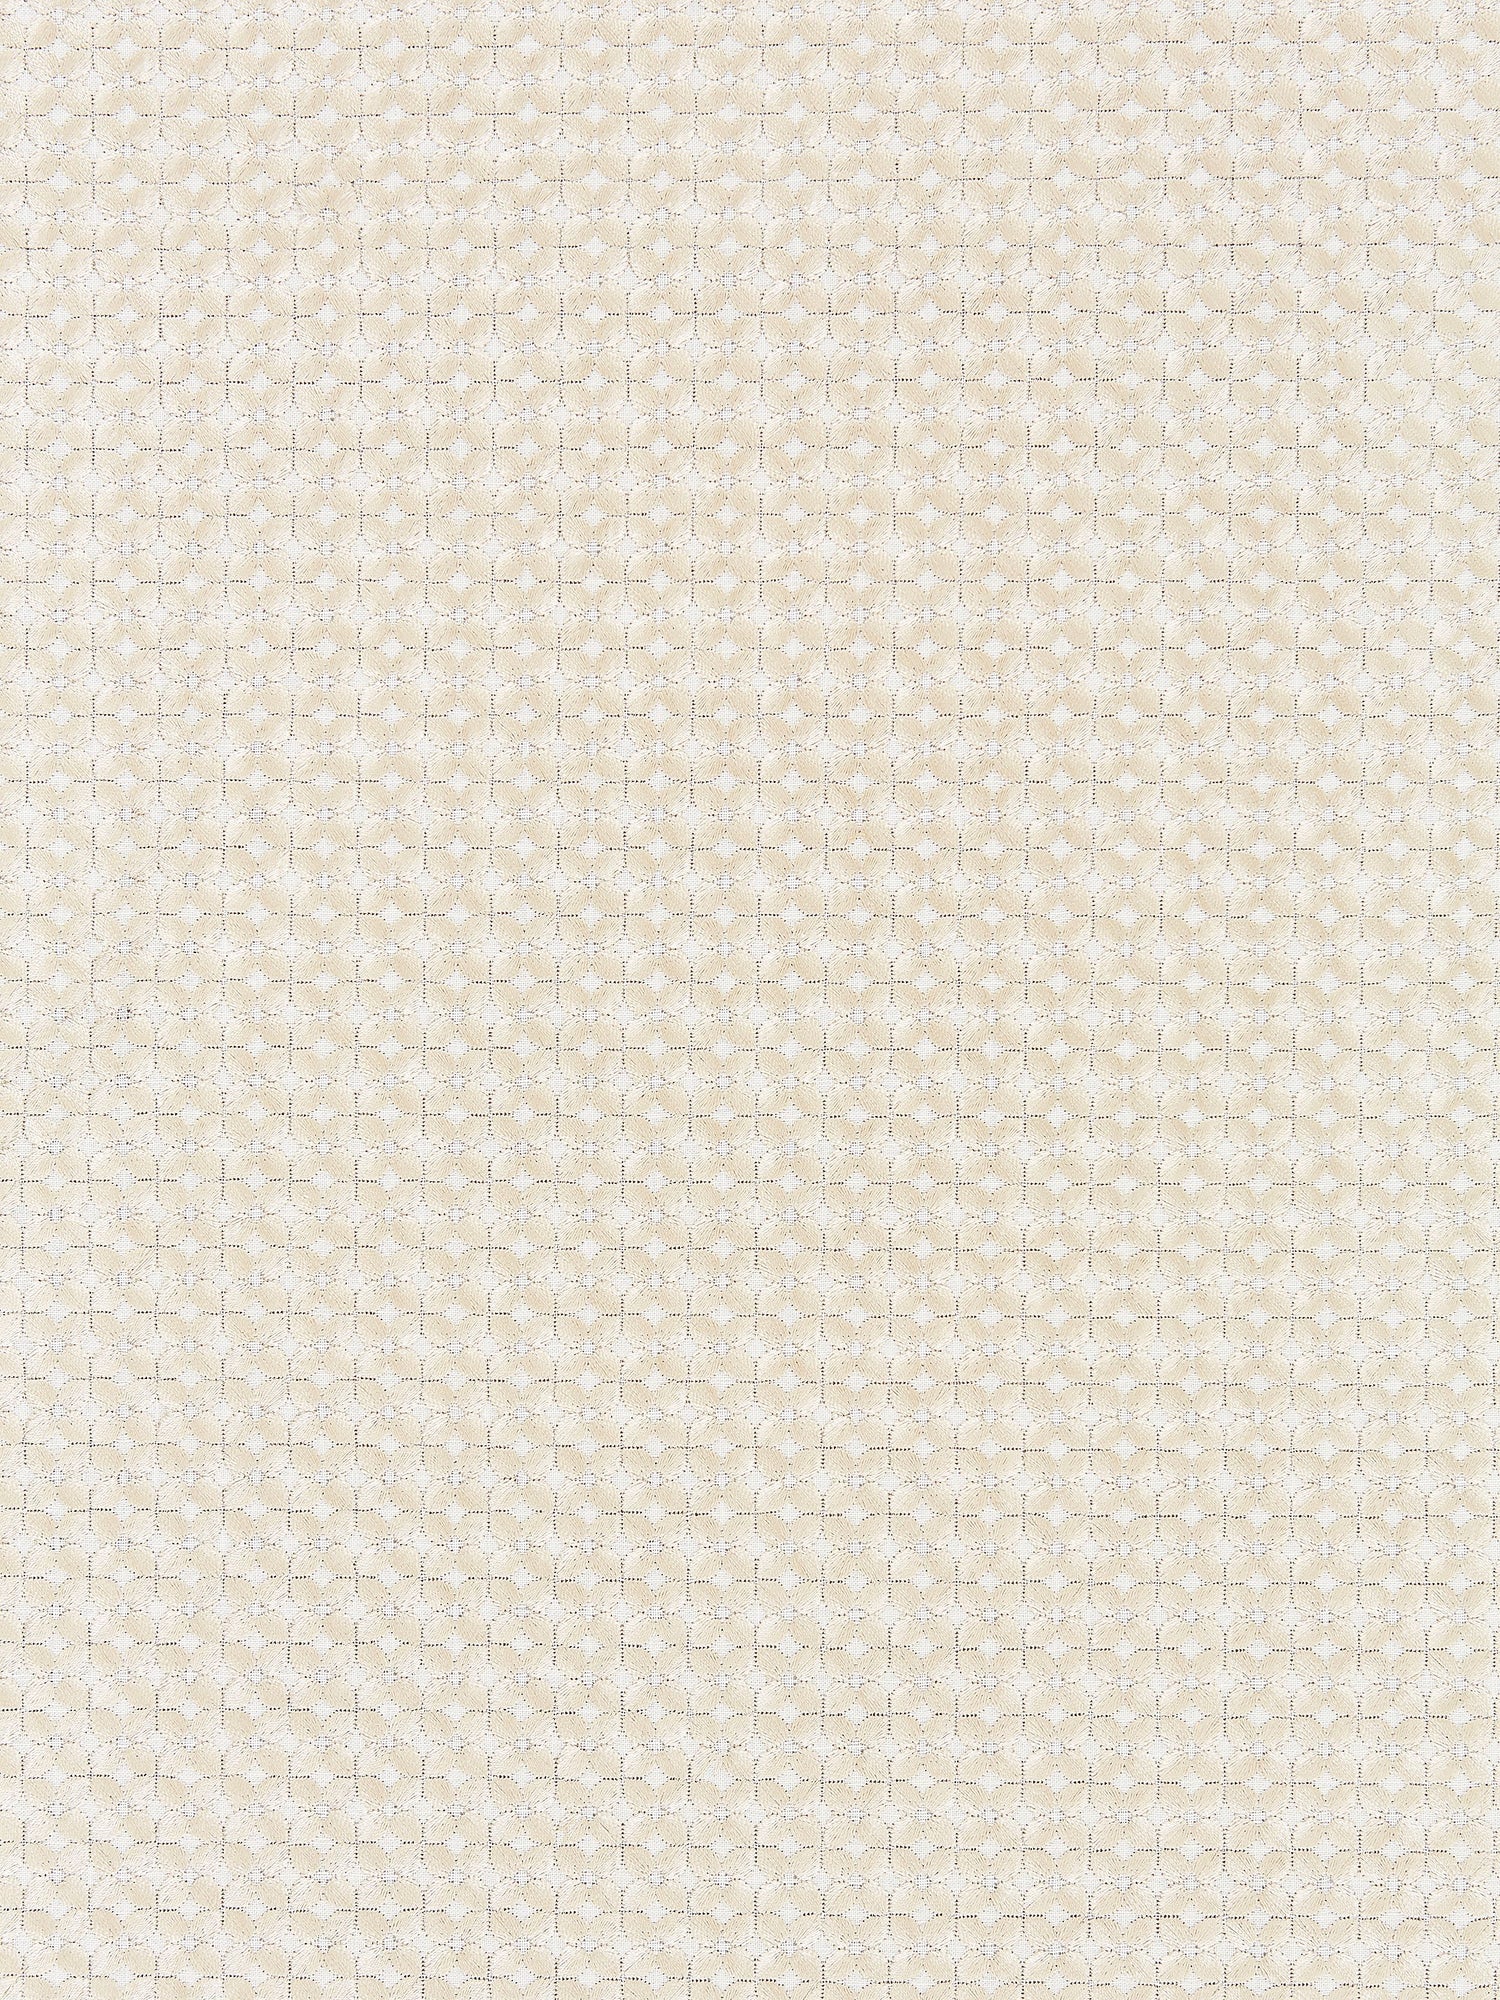 Floret Embroidery fabric in champagne color - pattern number SC 000127133 - by Scalamandre in the Scalamandre Fabrics Book 1 collection